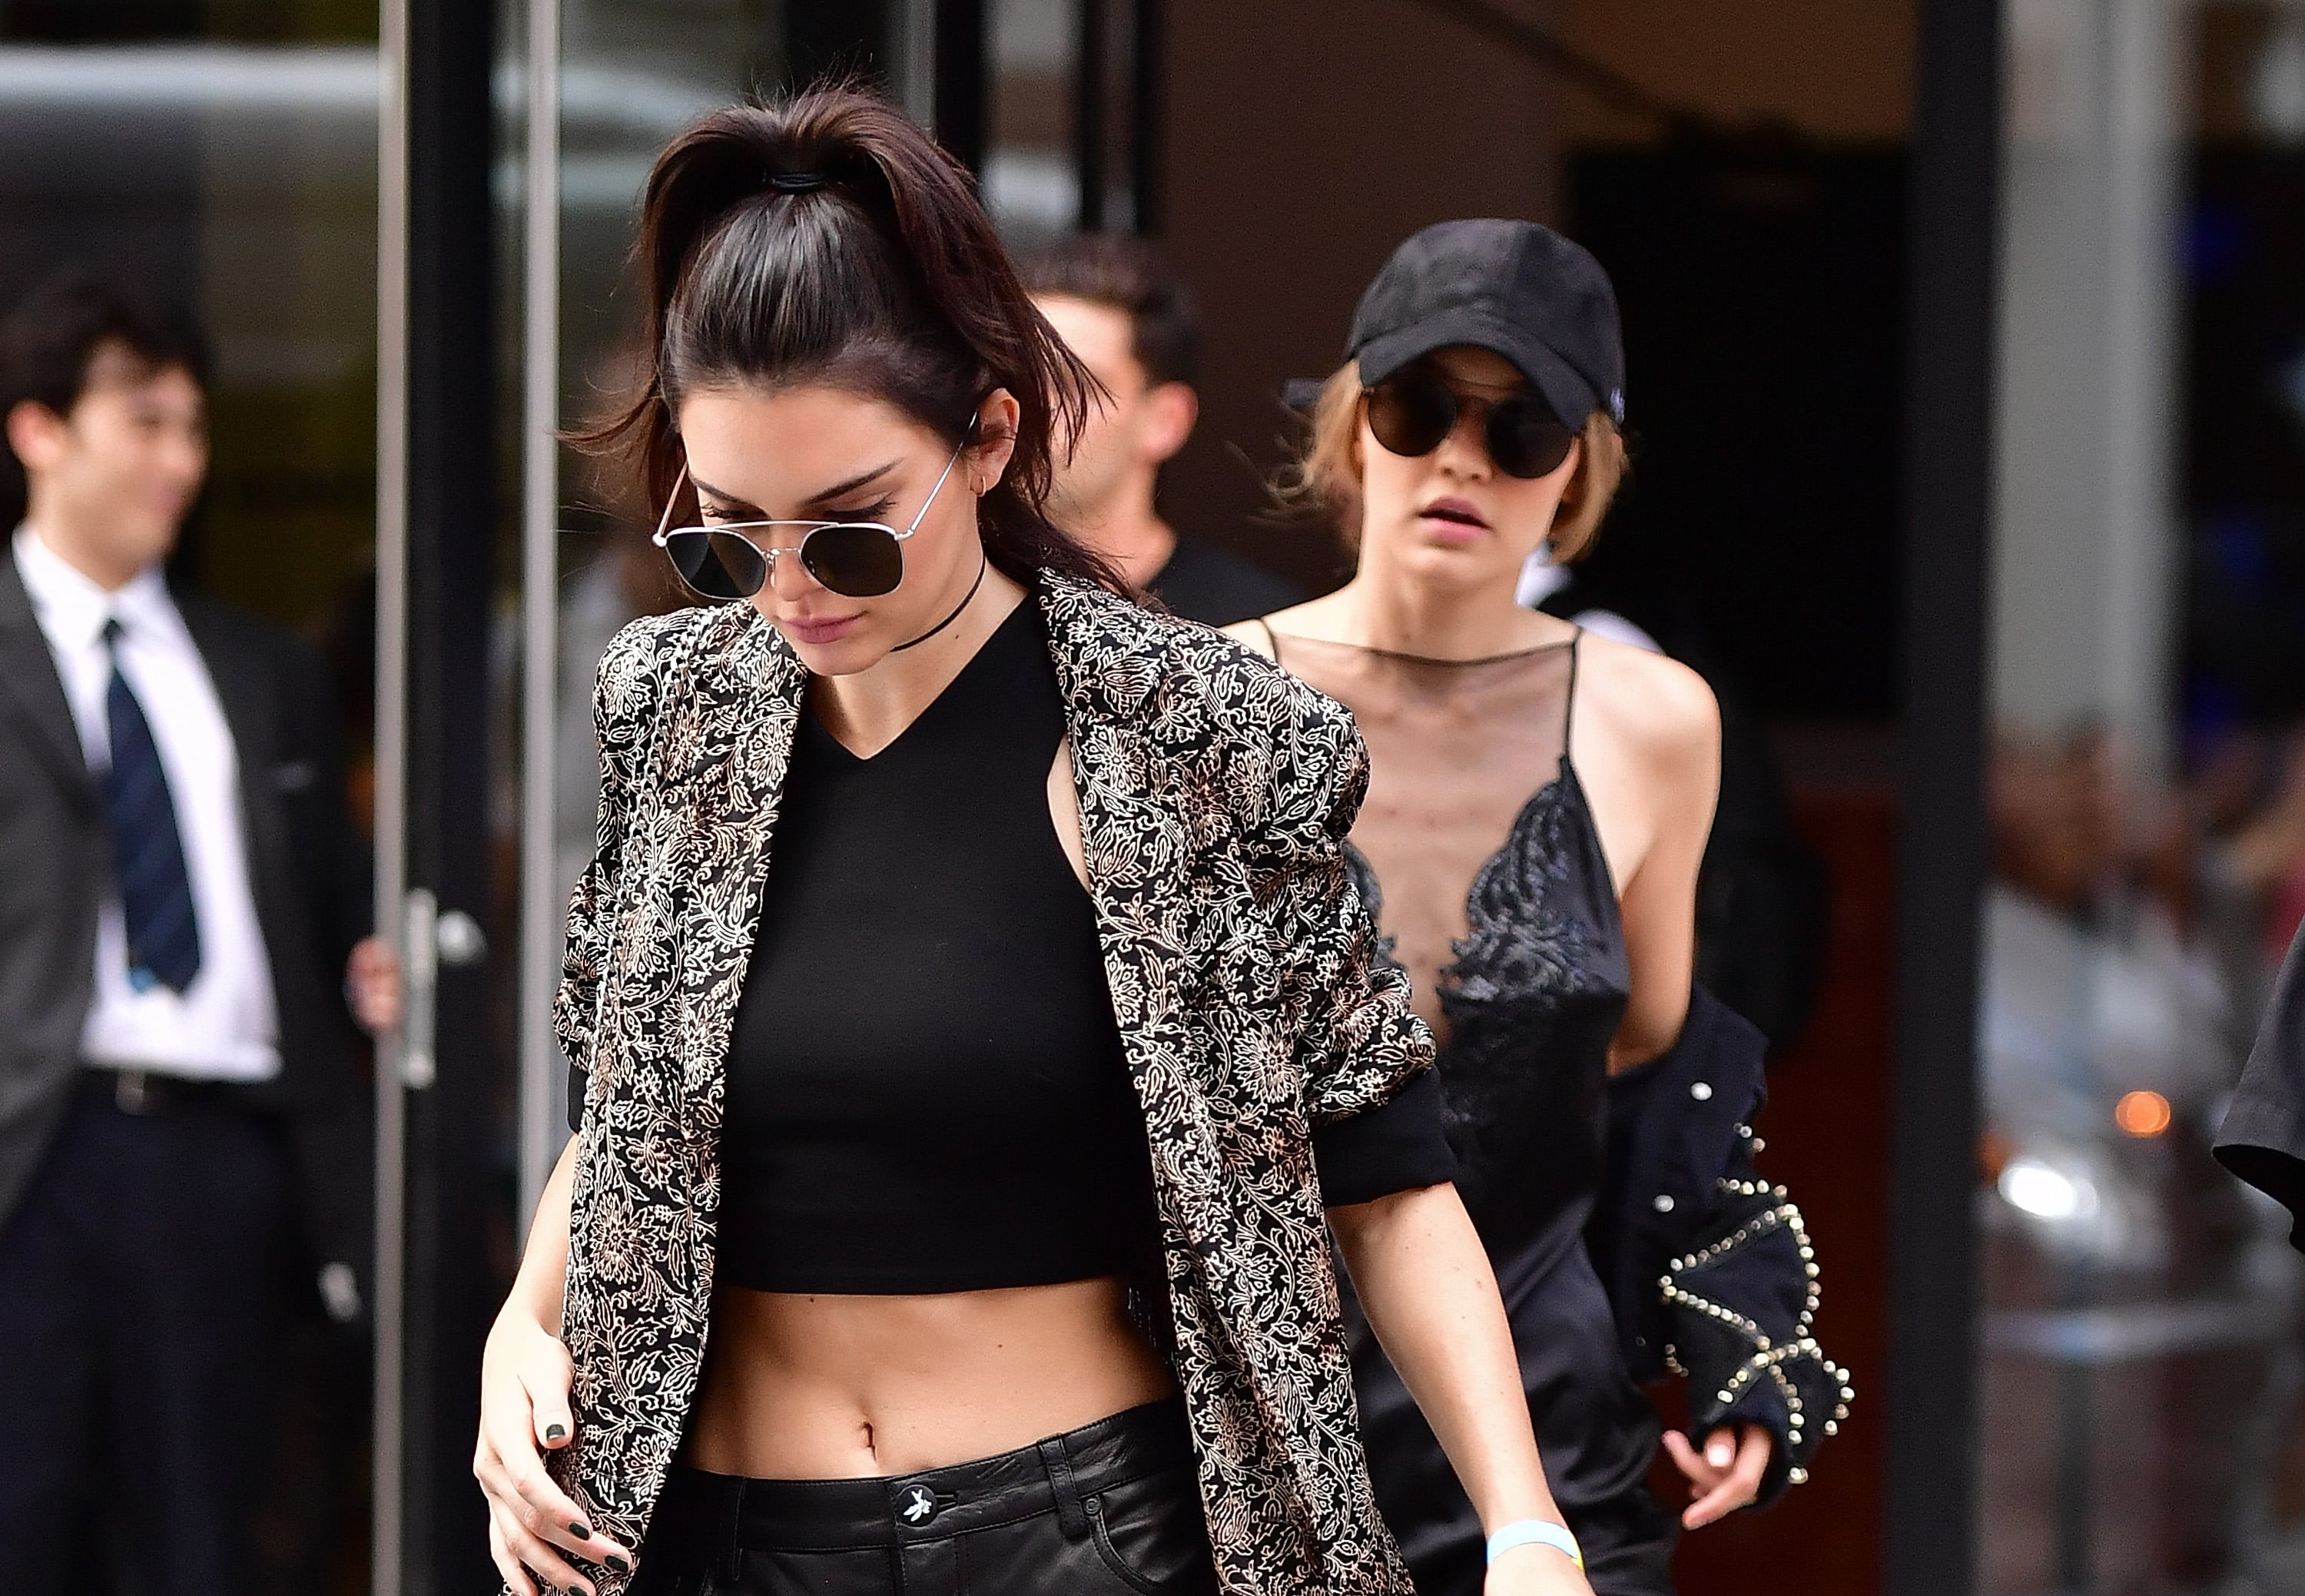 Kylie Jenner rocks the 90s while Kendall shows off her toned